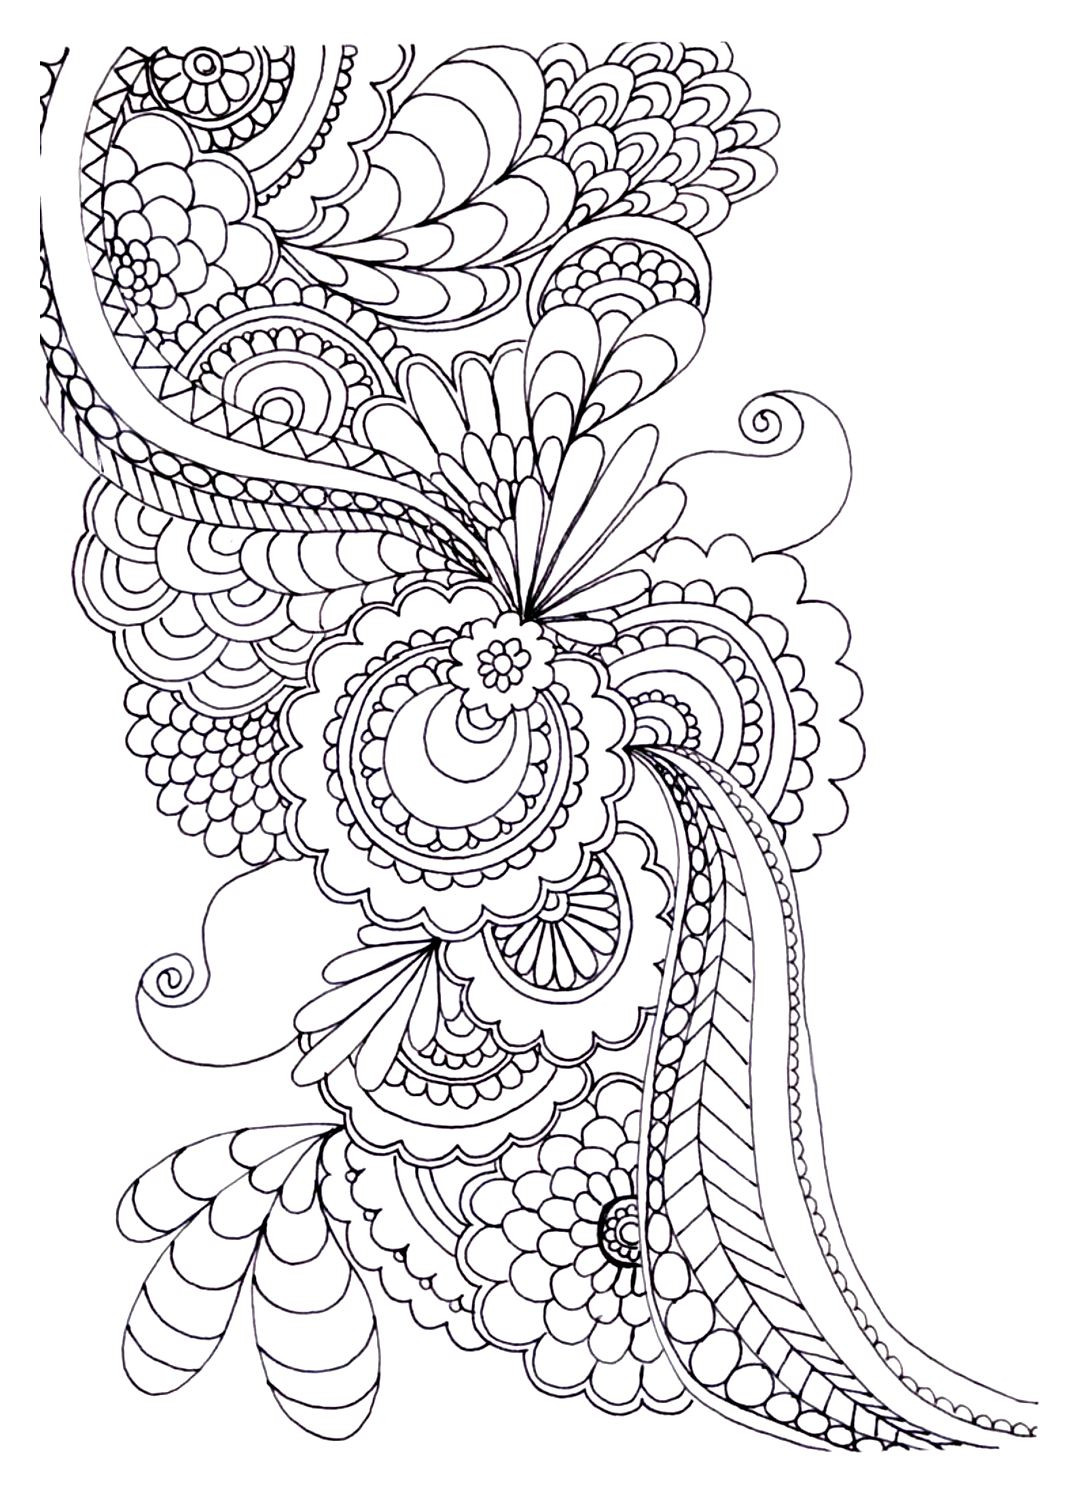 Adult Coloring Book
 20 Free Adult Colouring Pages The Organised Housewife